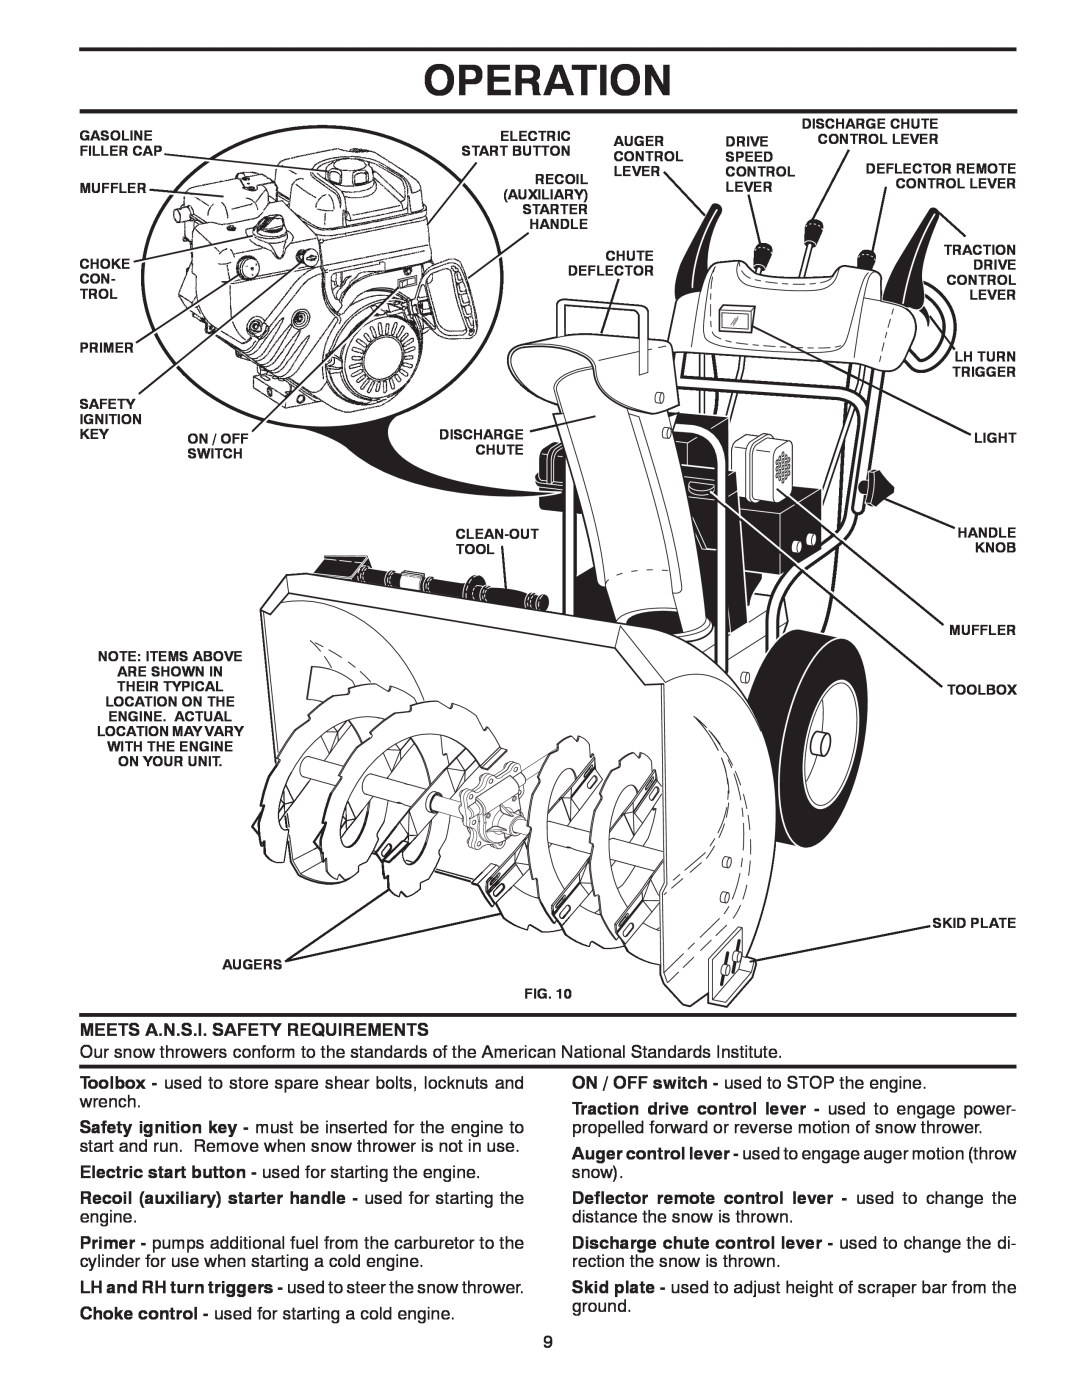 Poulan 428861, 96192003500, XT11530ES owner manual Operation, Meets A.N.S.I. Safety Requirements 